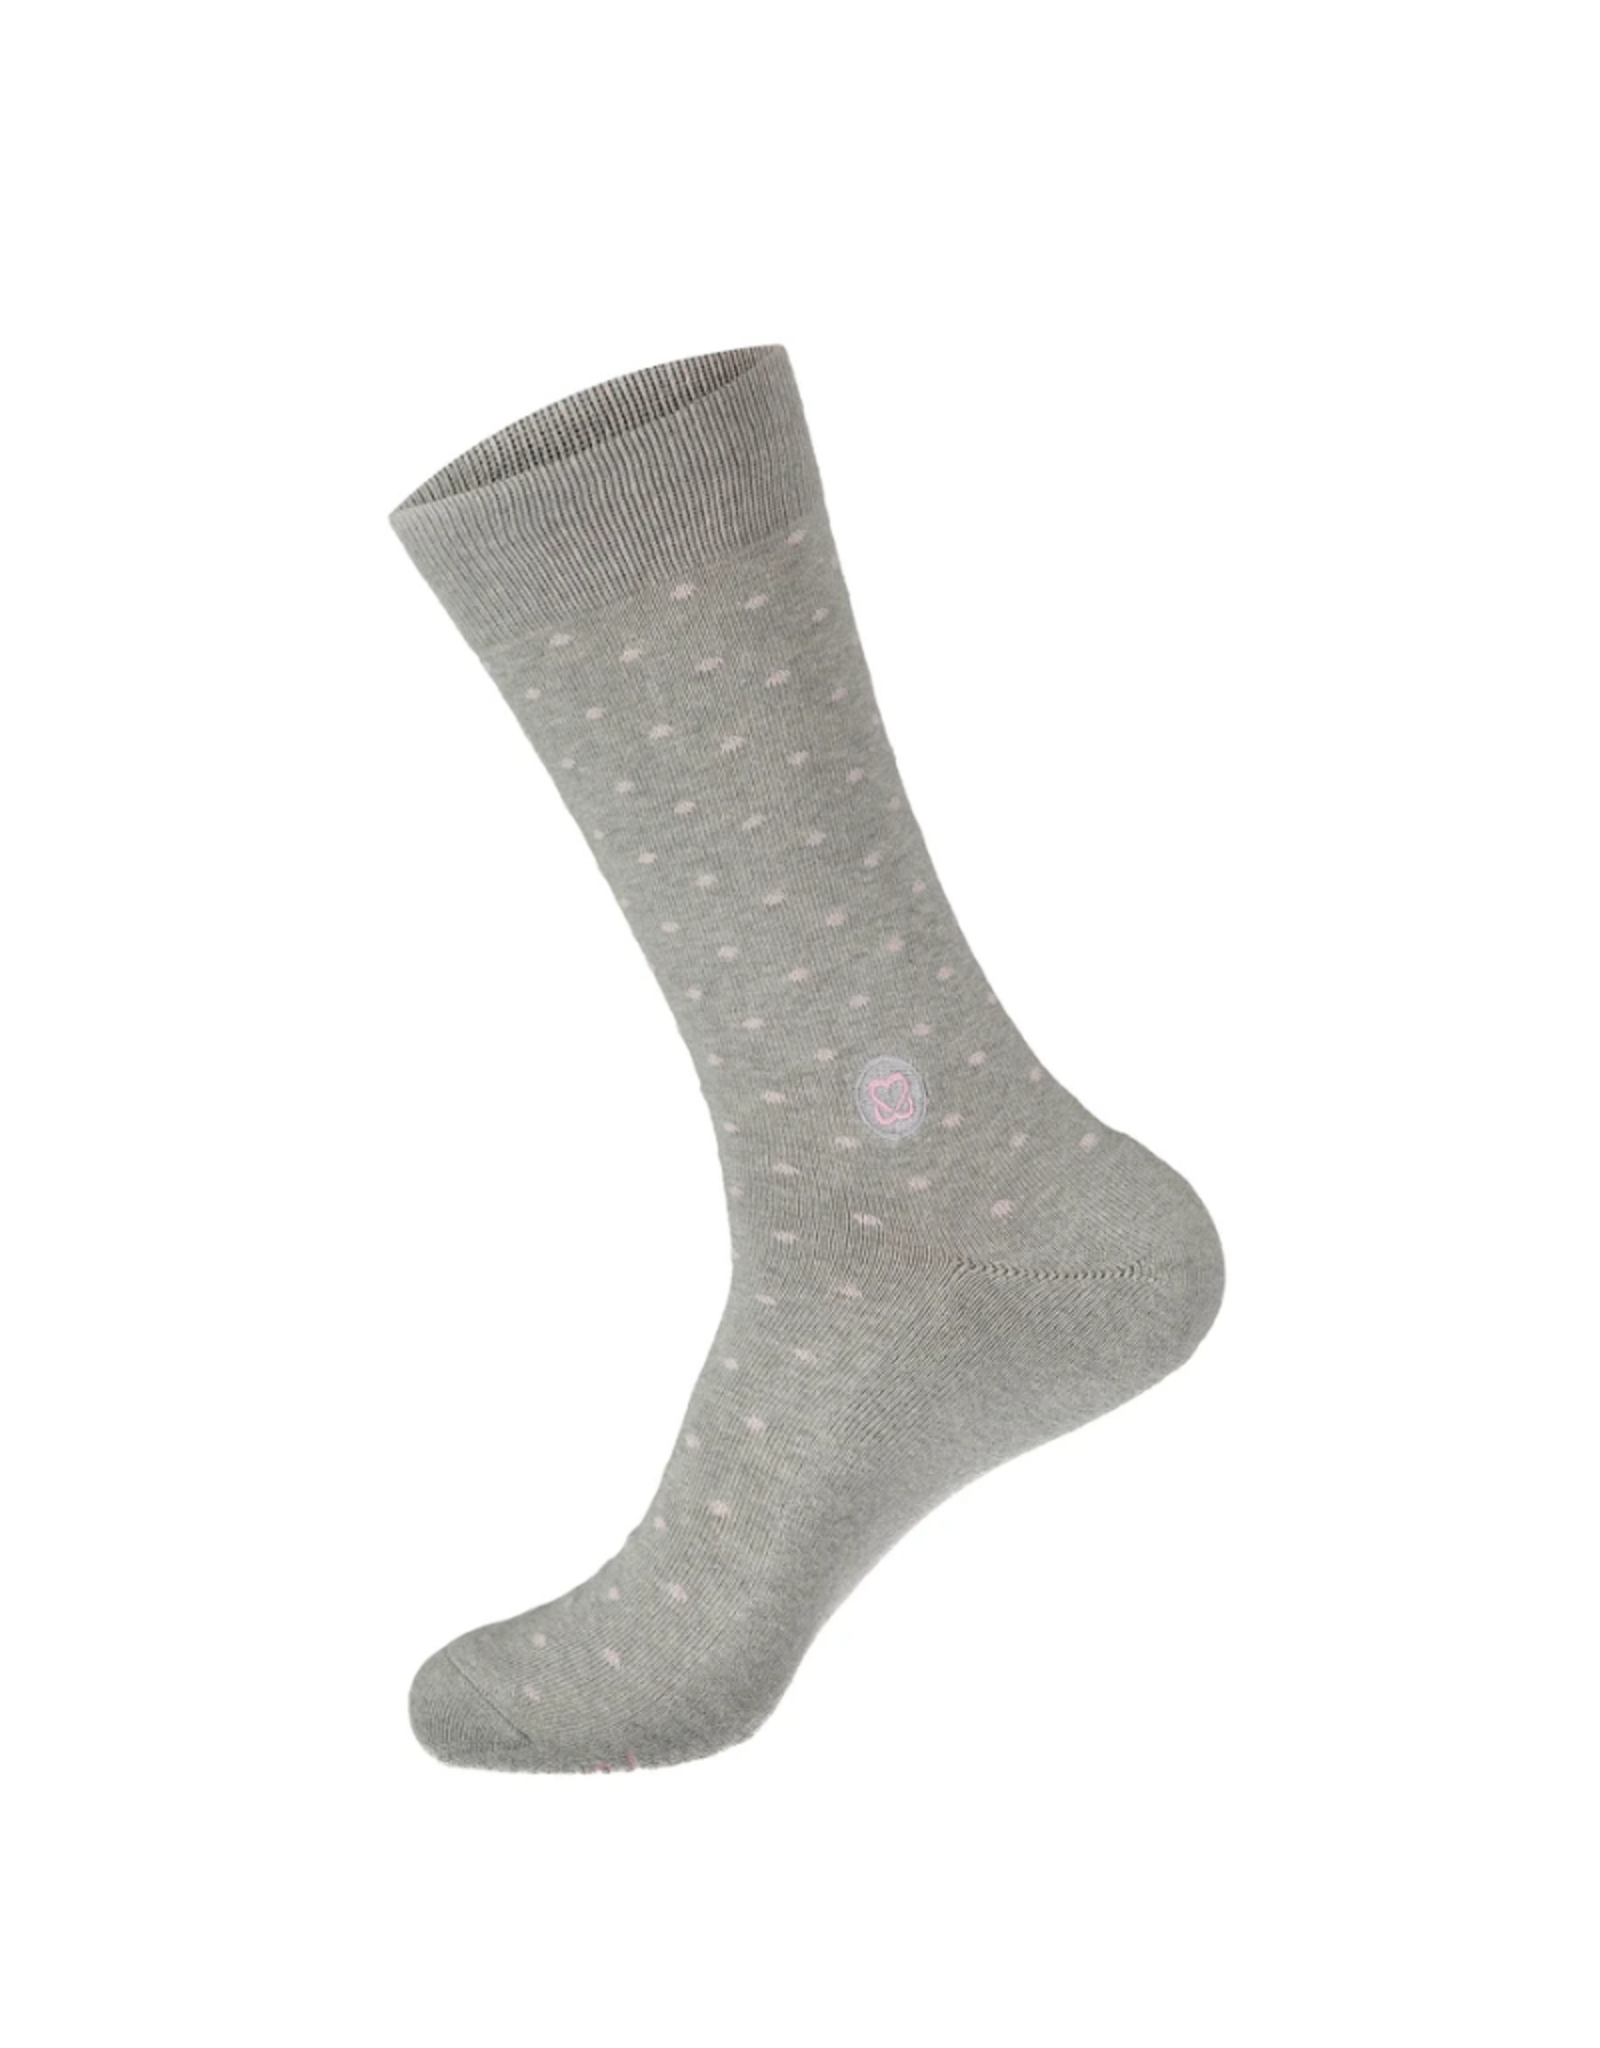 Conscious Step Socks That Promote Breast Cancer Prevention (M)